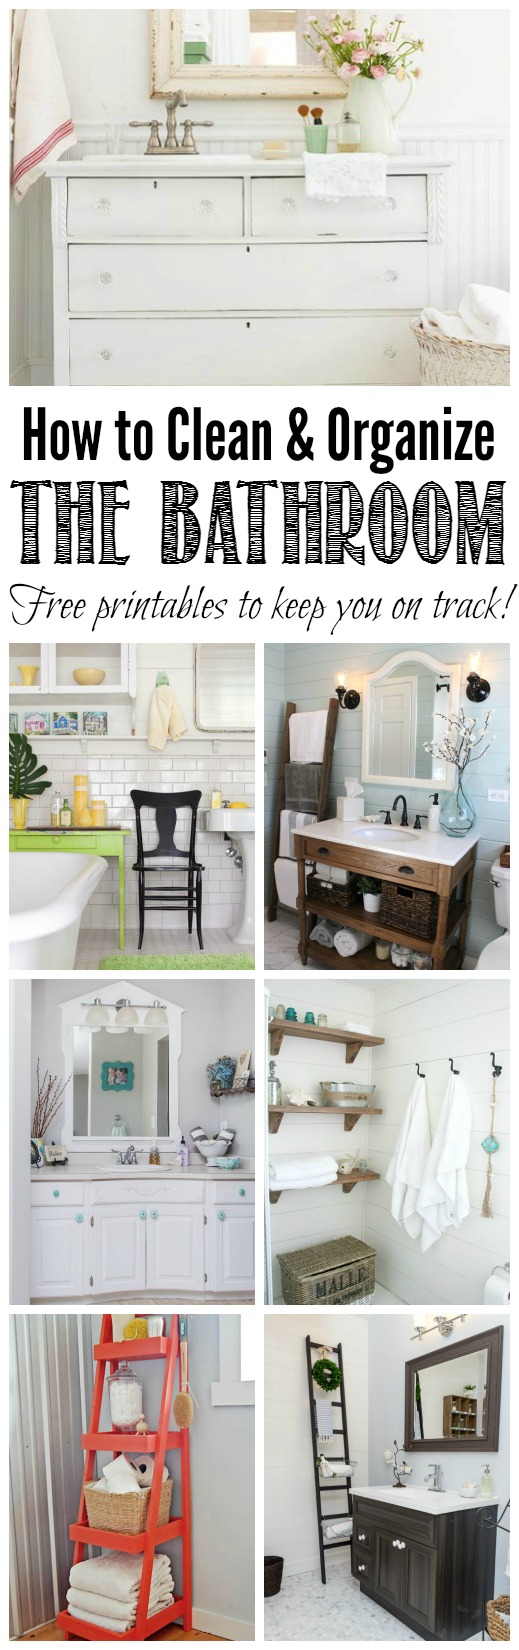 An easy to follow month long plan to get all of your bathrooms cleaned and organized. Free printables, included to help keep you on track! // cleanandscentsible.com